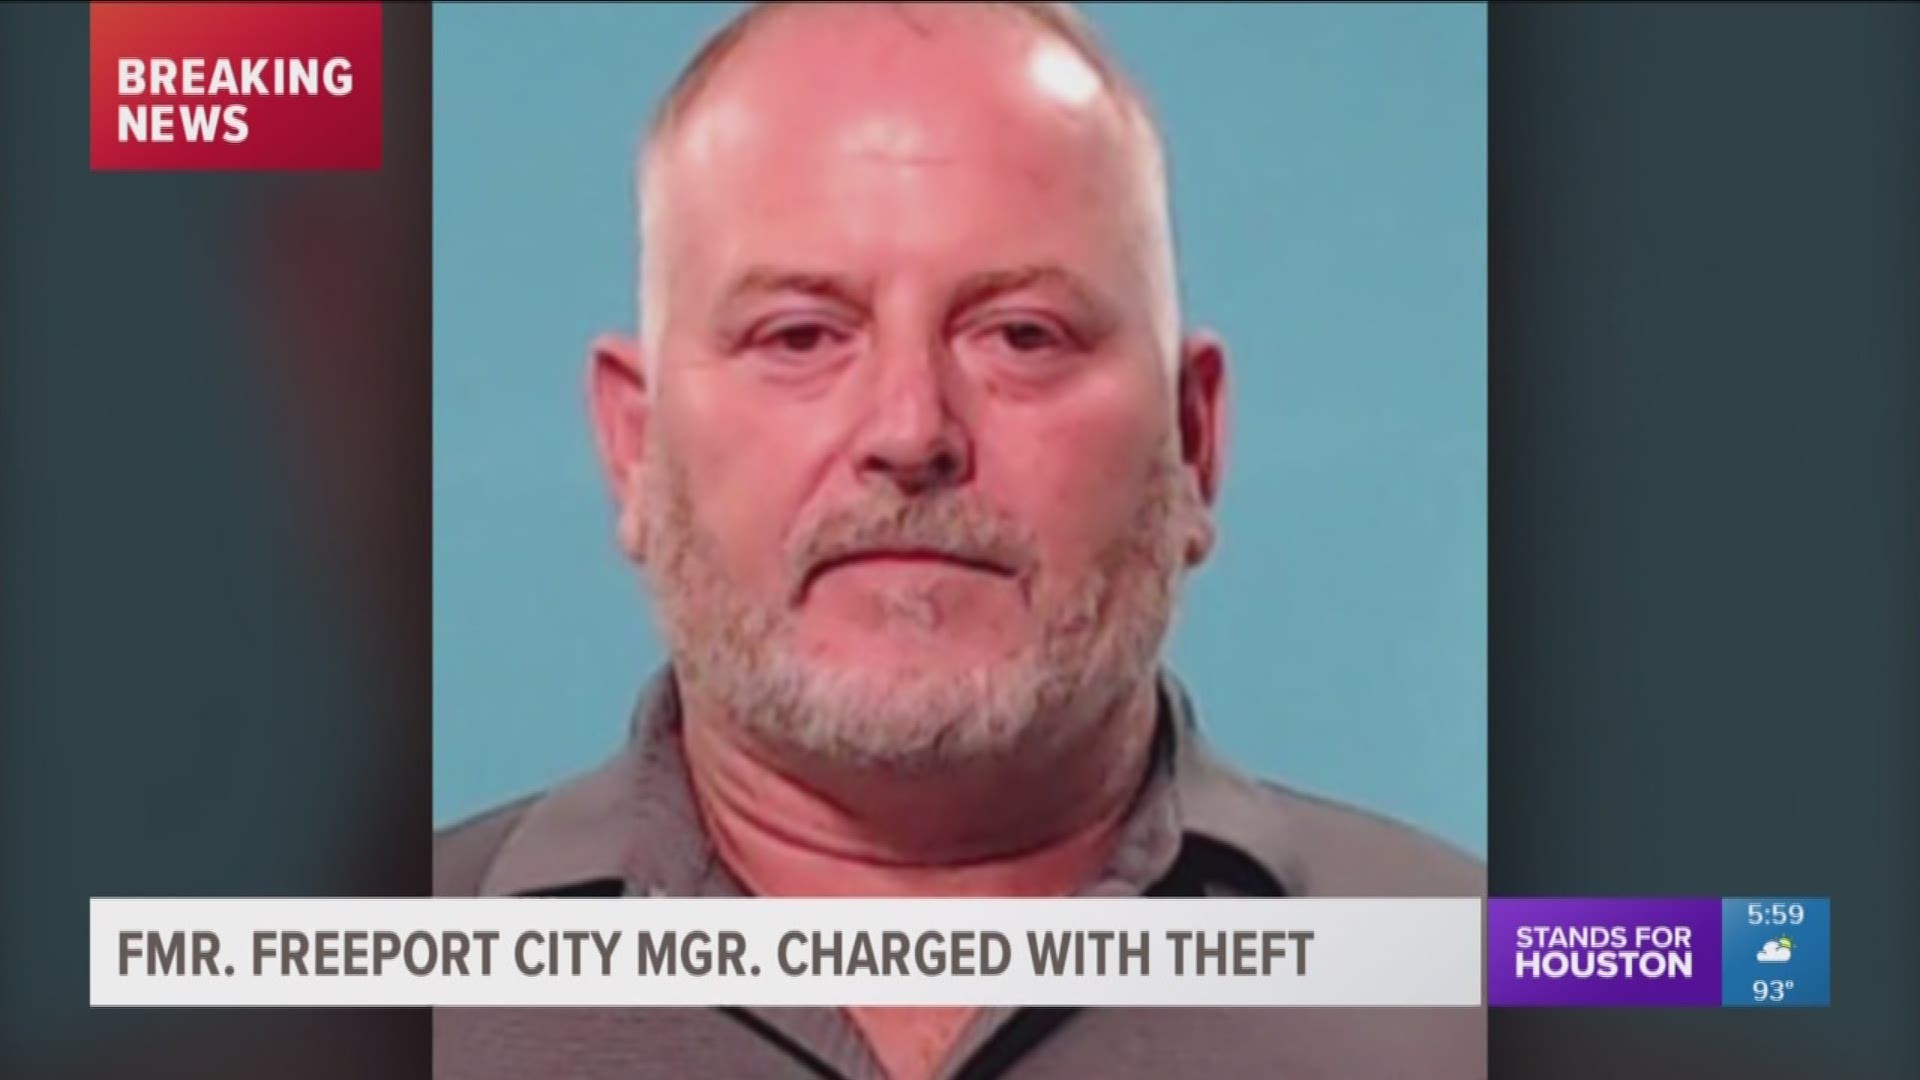 The former city manager of Freeport is accused of taking kickbacks and stealing hundreds of thousands from the city.